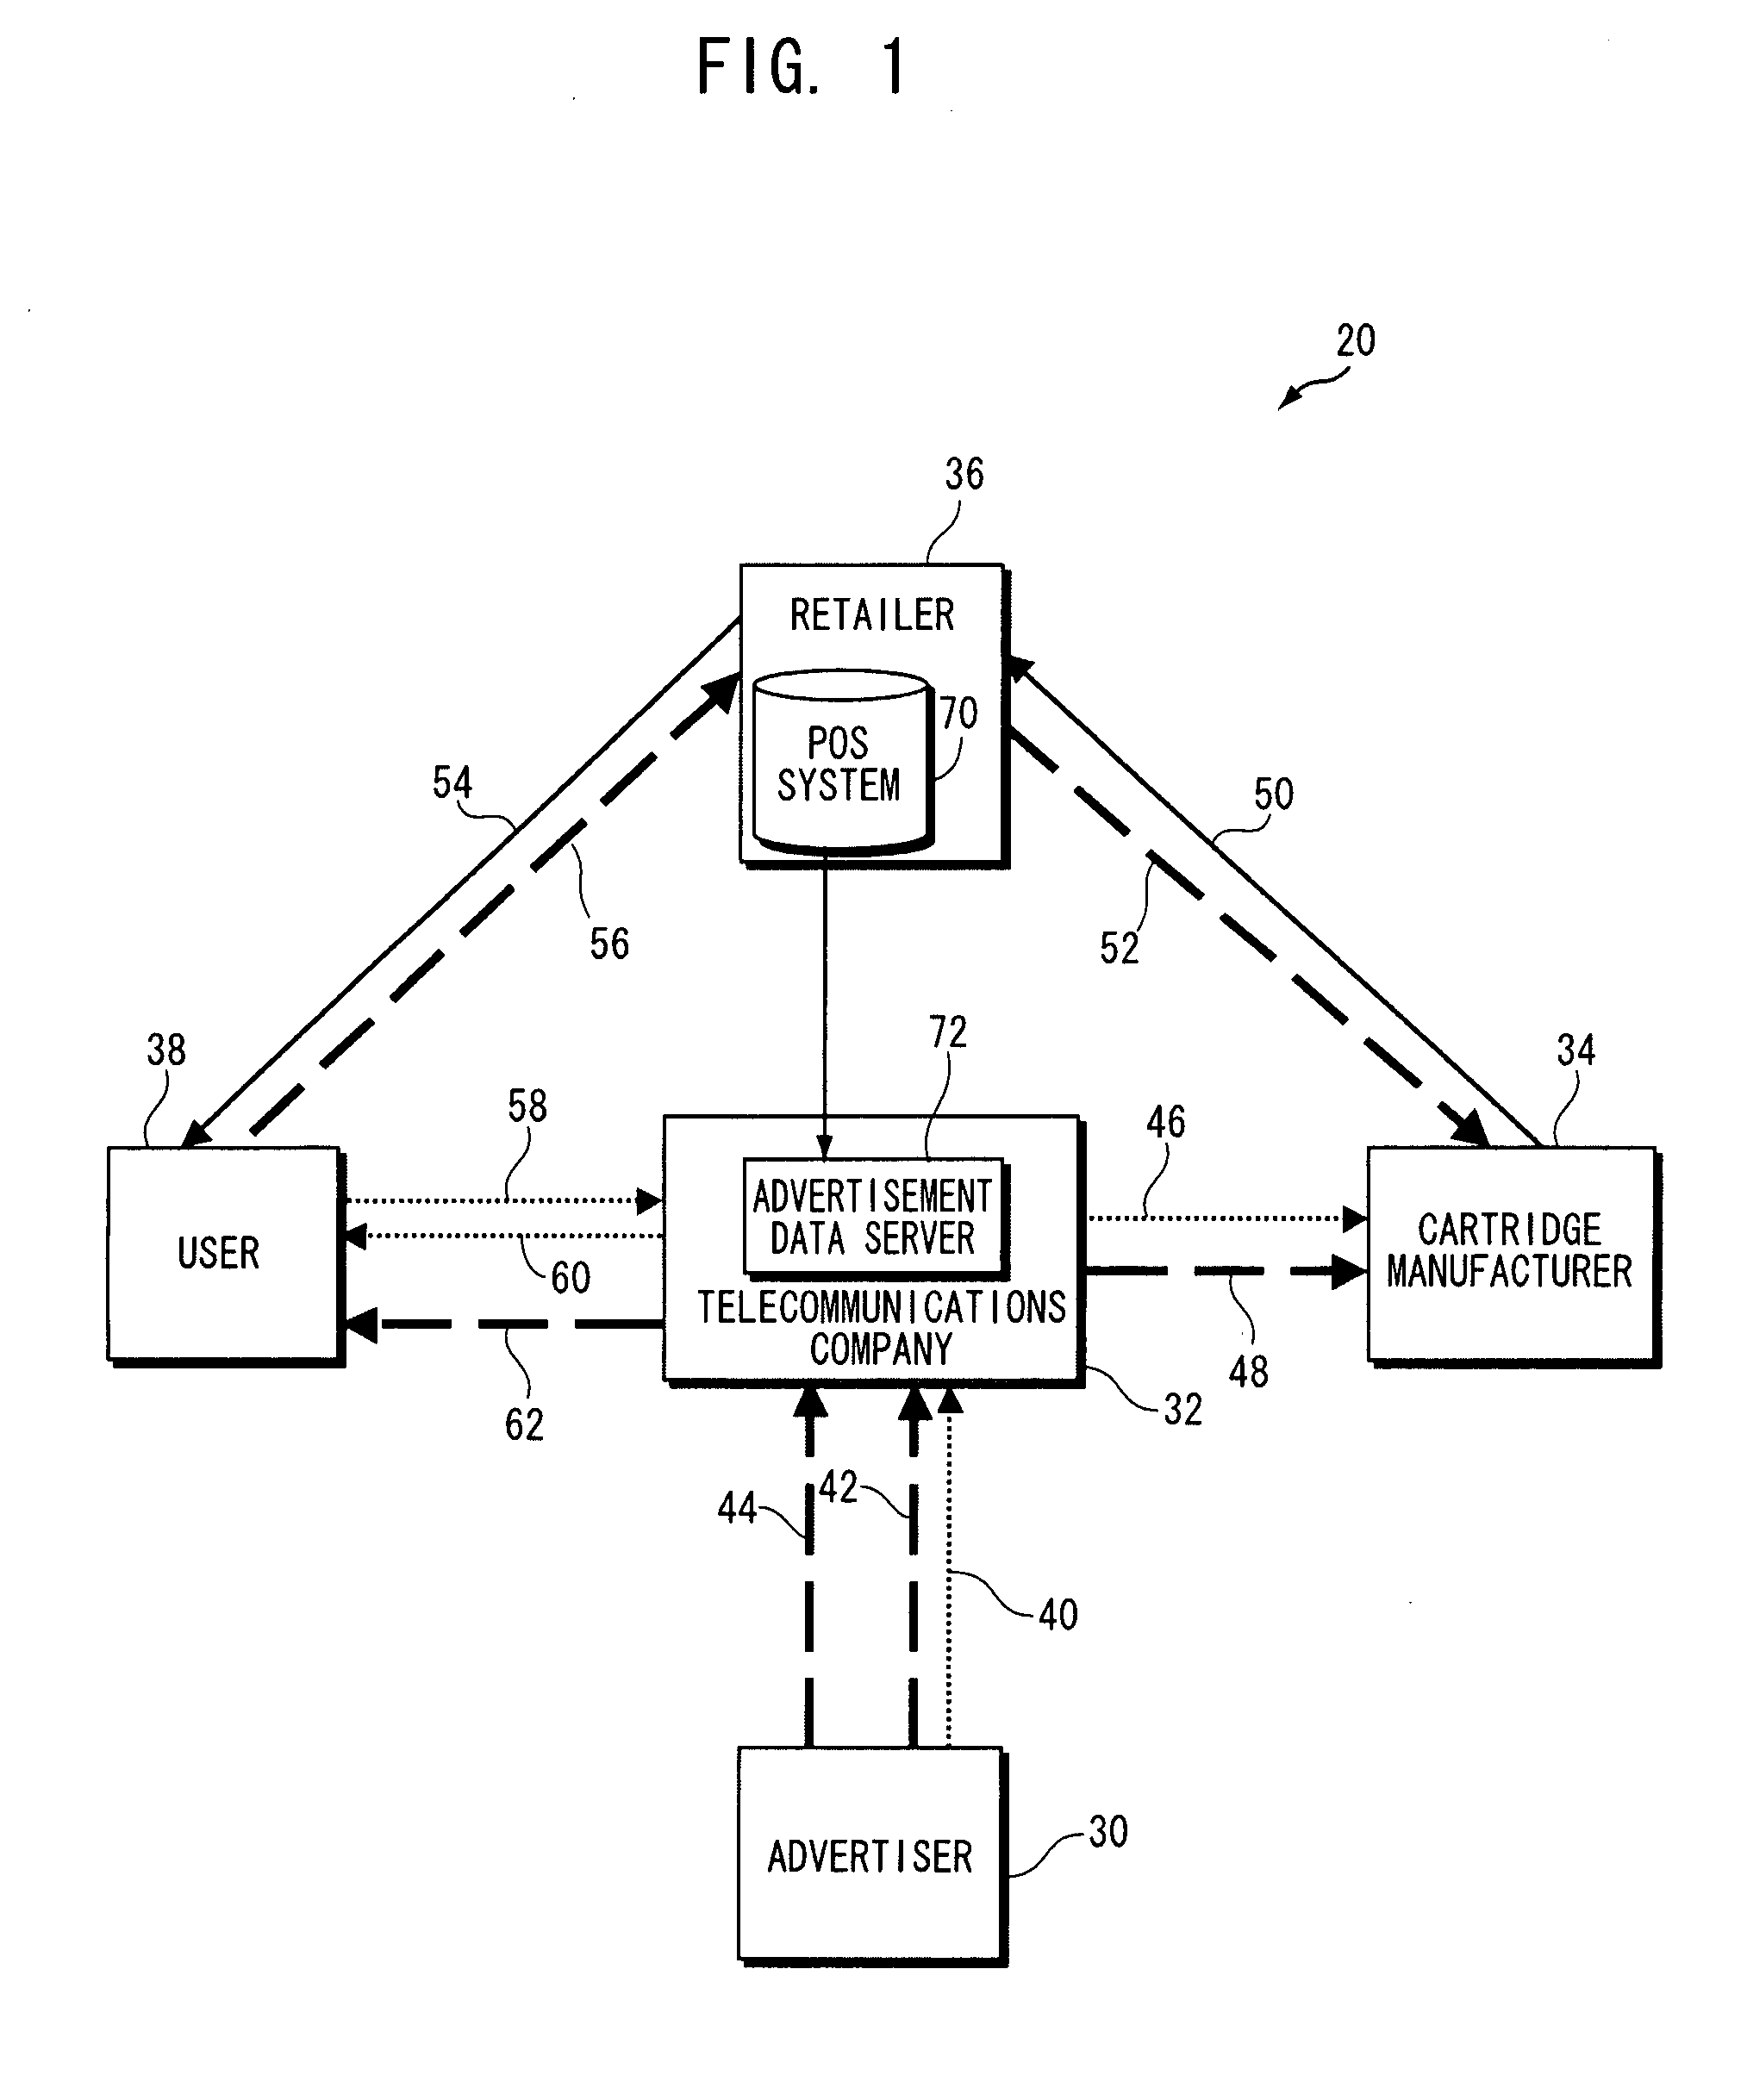 Apparatus and method and computer program product for distributing advertisement